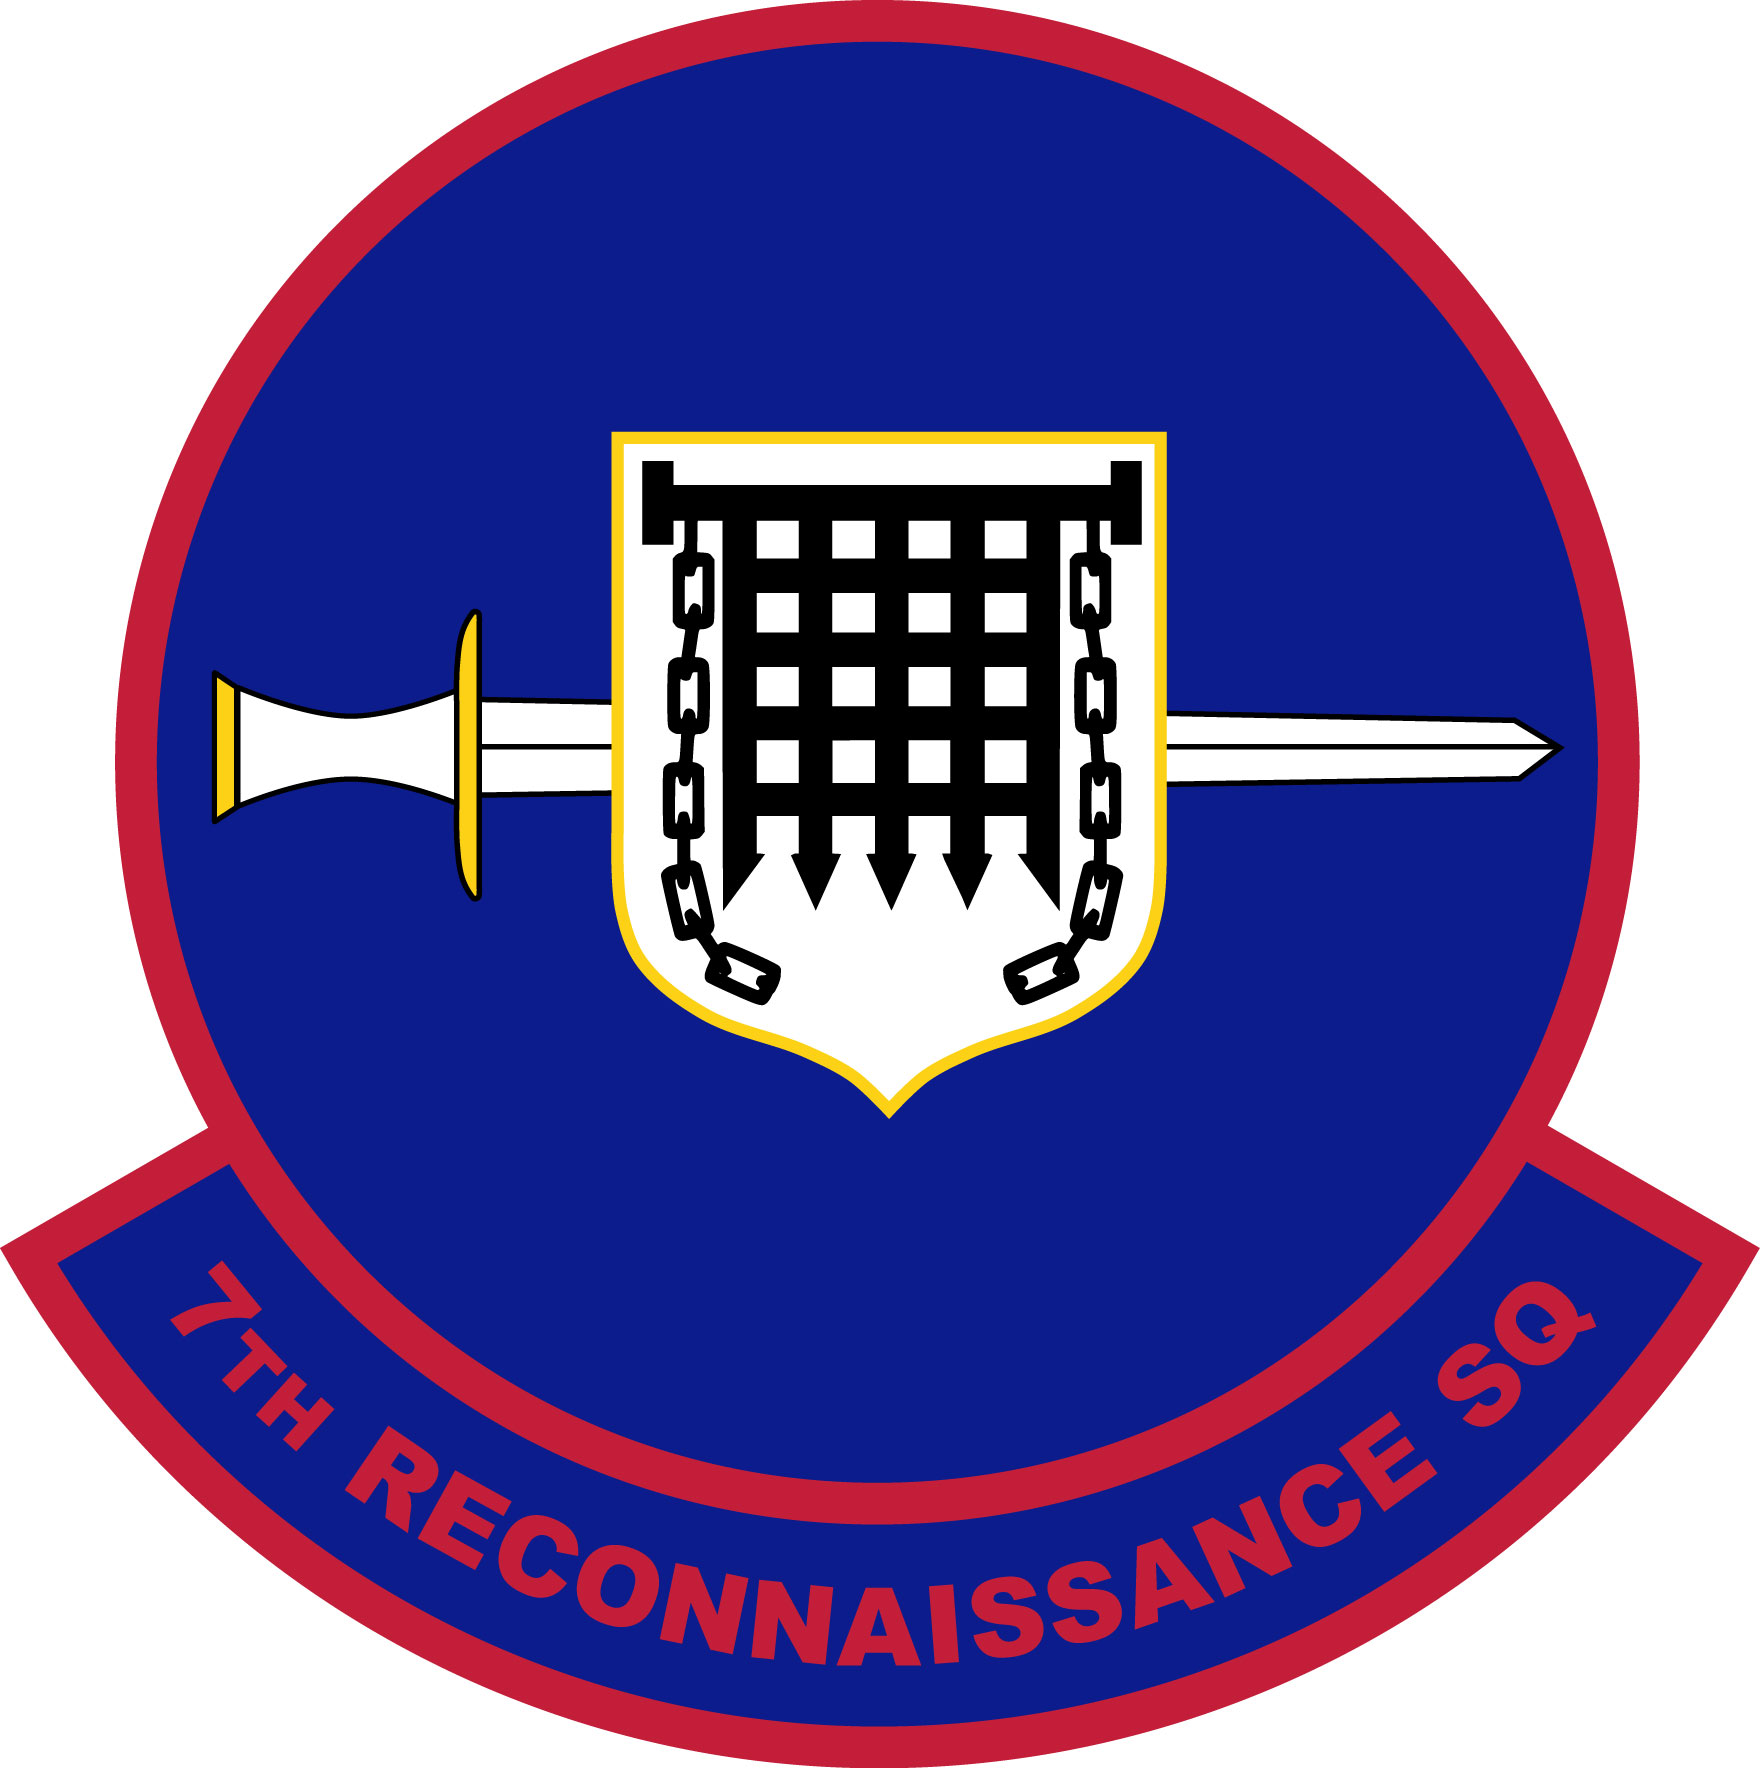 This is an image of the 7th Reconnaissance Squadron's seal.